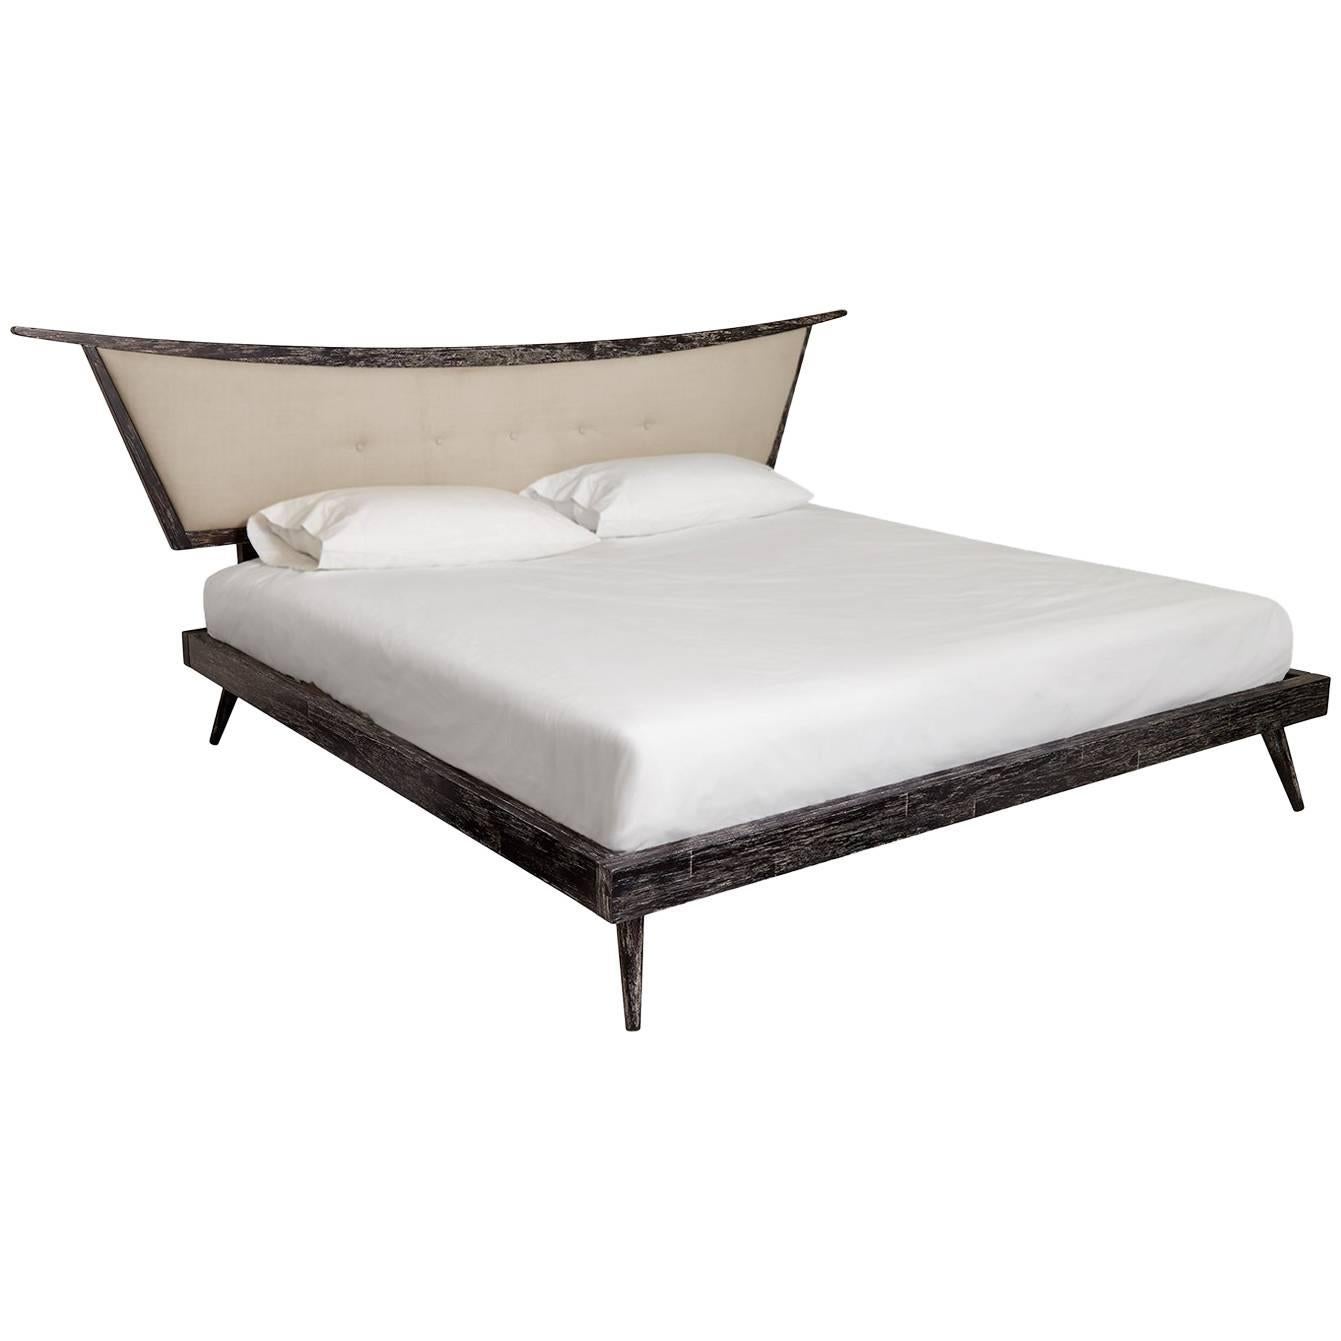 Slumber in gypset glamour with our parker platform bed. The ebonized, cerused frame balances a Mid-Century Modern Silhouette with chinoiserie influences, while the luxe linen headboard offers timeless style. The perfect place to tuck in for the